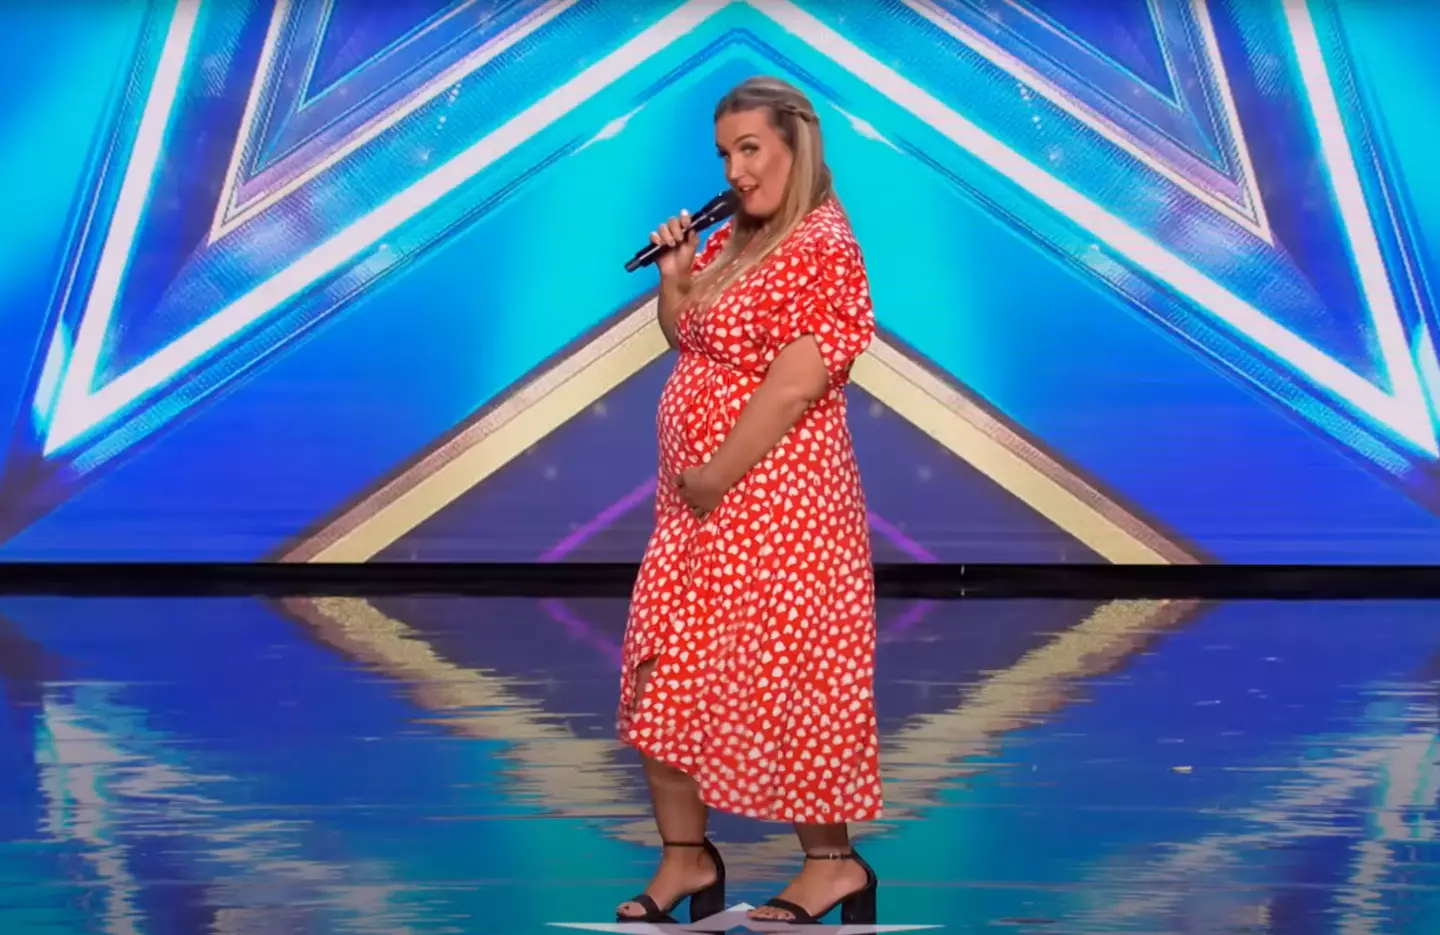 Pregnant BGT star Amy Lou Smith - who stunned the judges with her epic performance - gave birth just hours before the audition aired on TV.